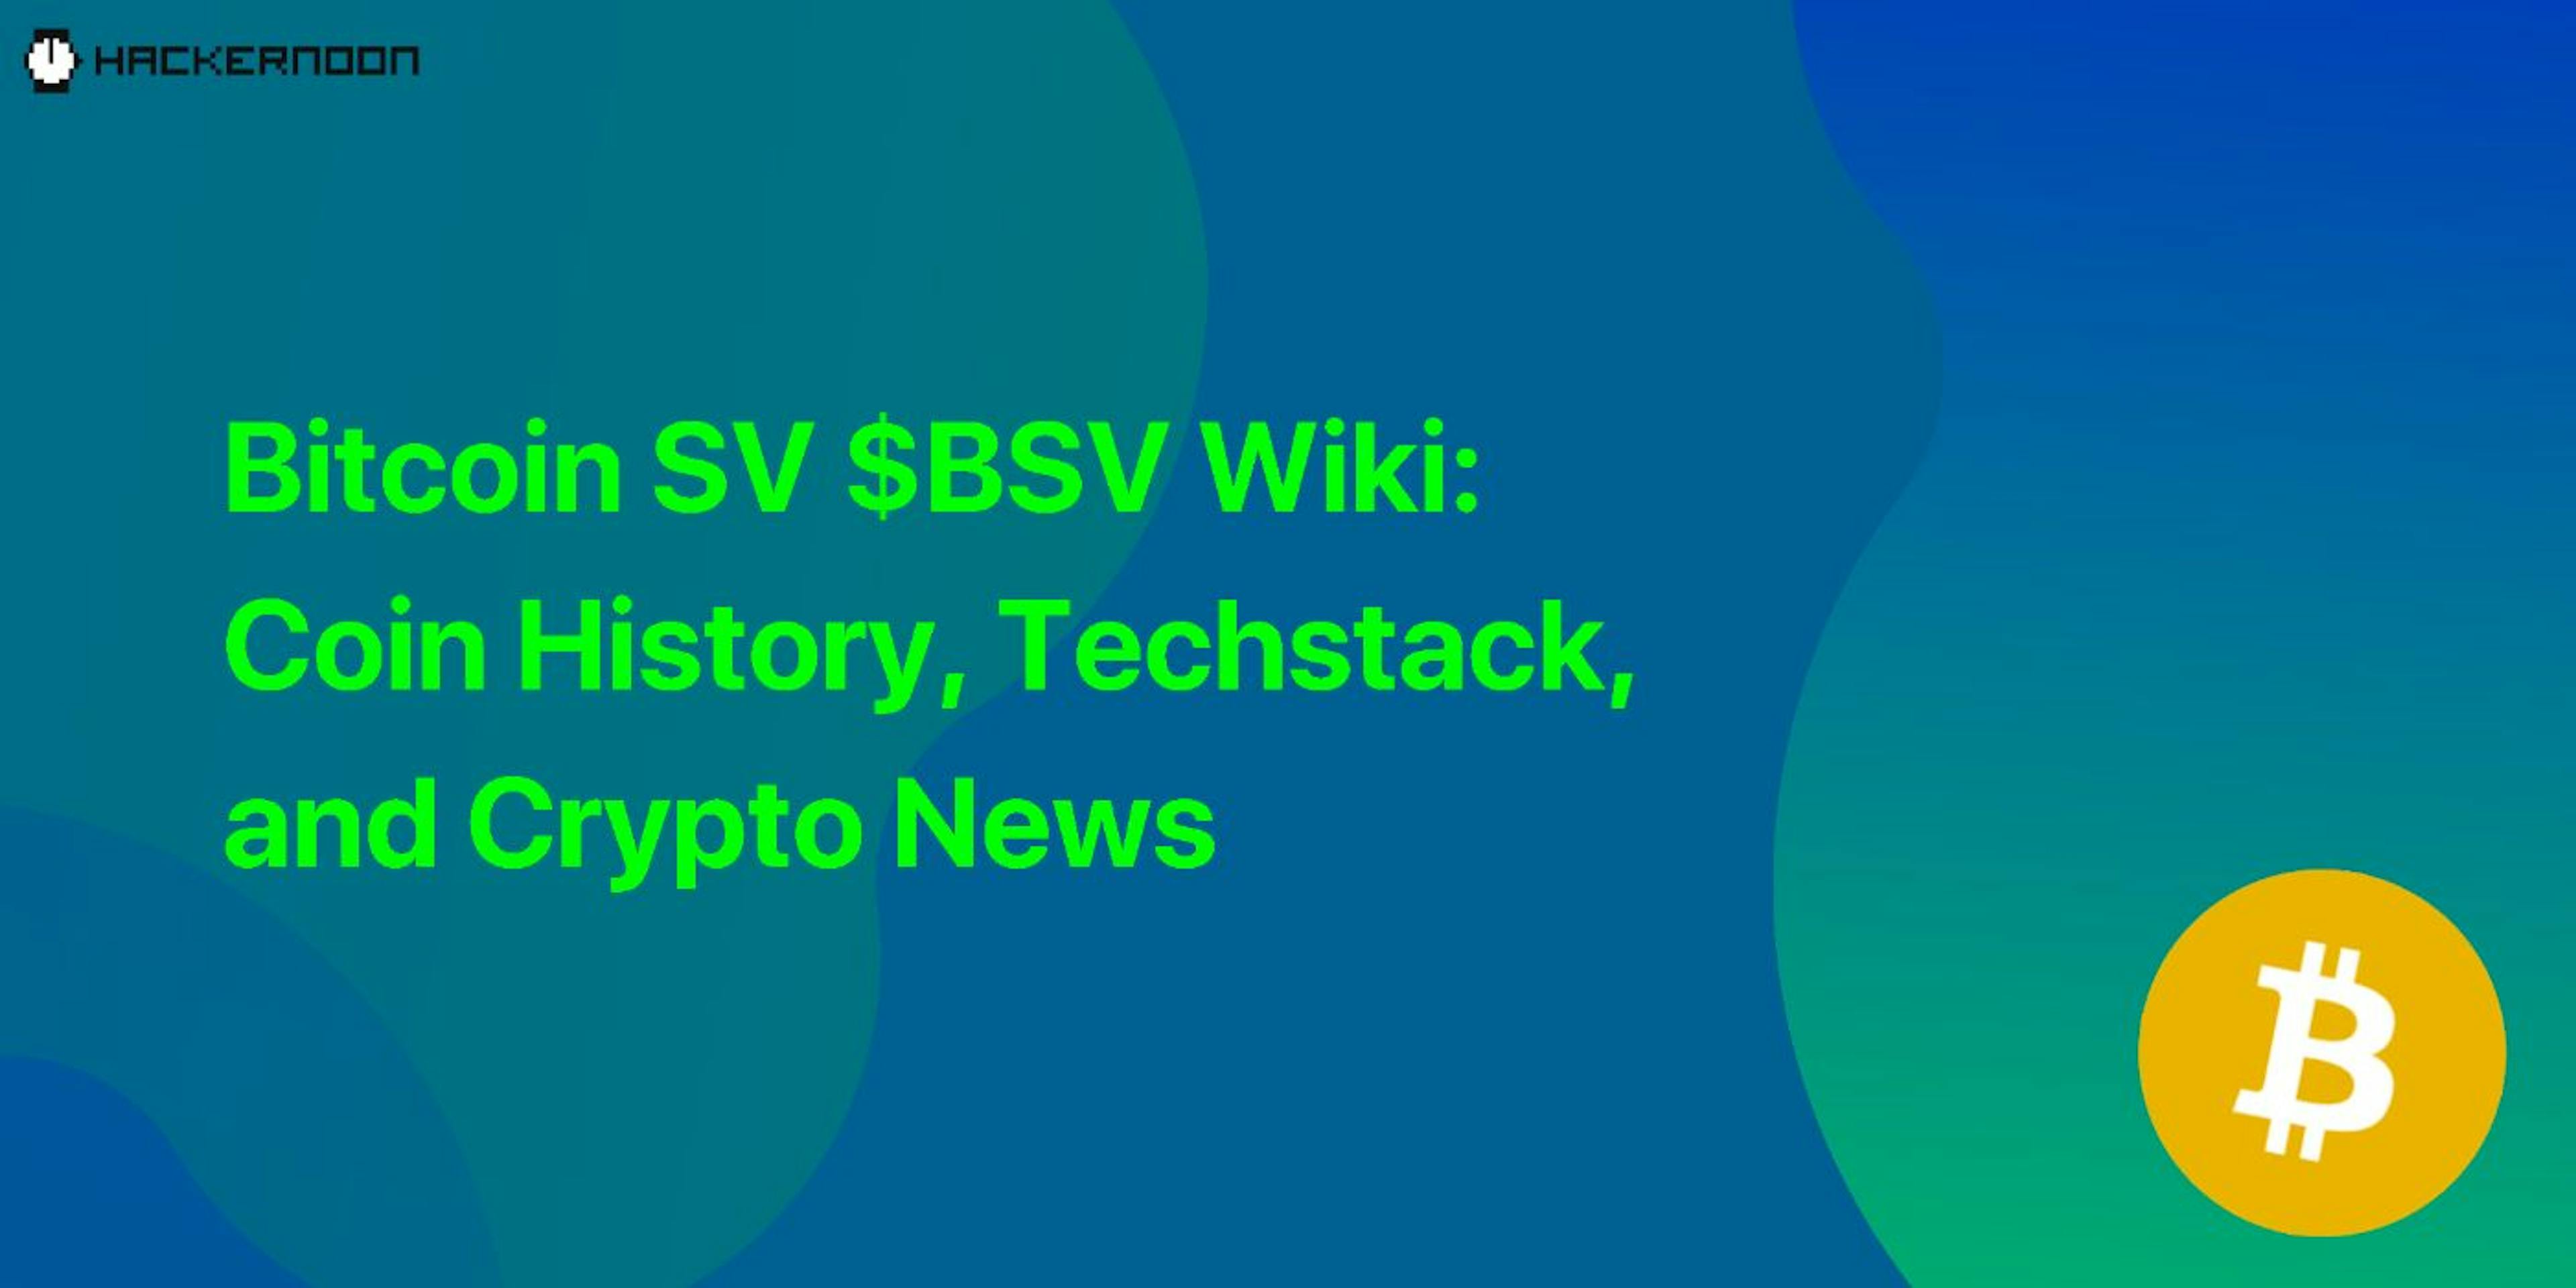 featured image - Bitcoin SV $BSV Wiki: Coin History, Techstack, and Crypto News